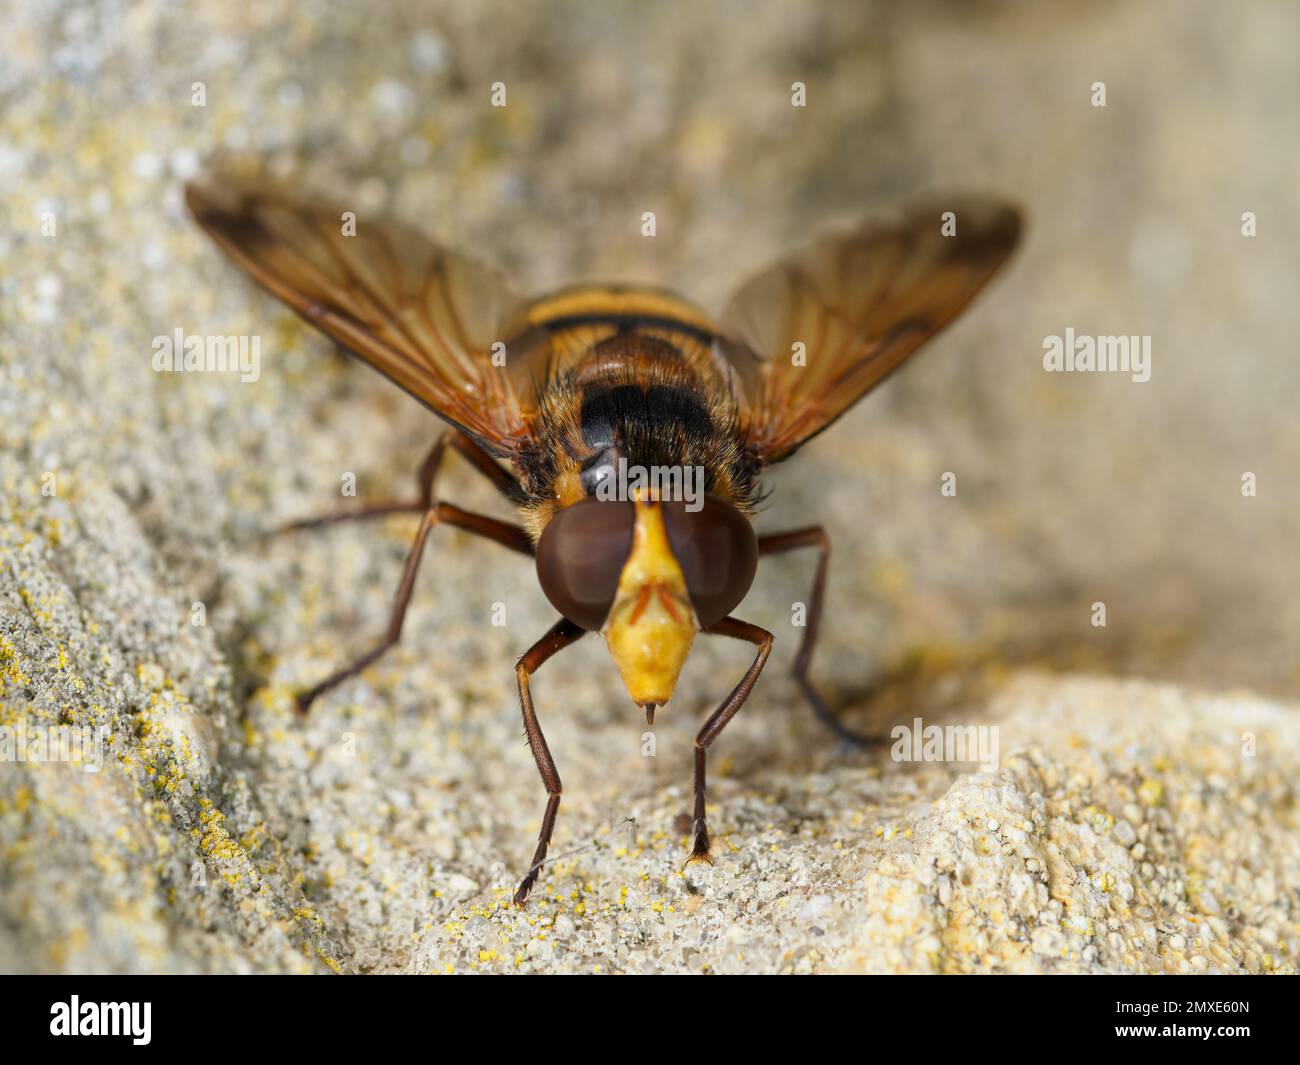 Common hoverfly (male) - Syrphus ribesii - resting on a cotswold stone wall Stock Photo